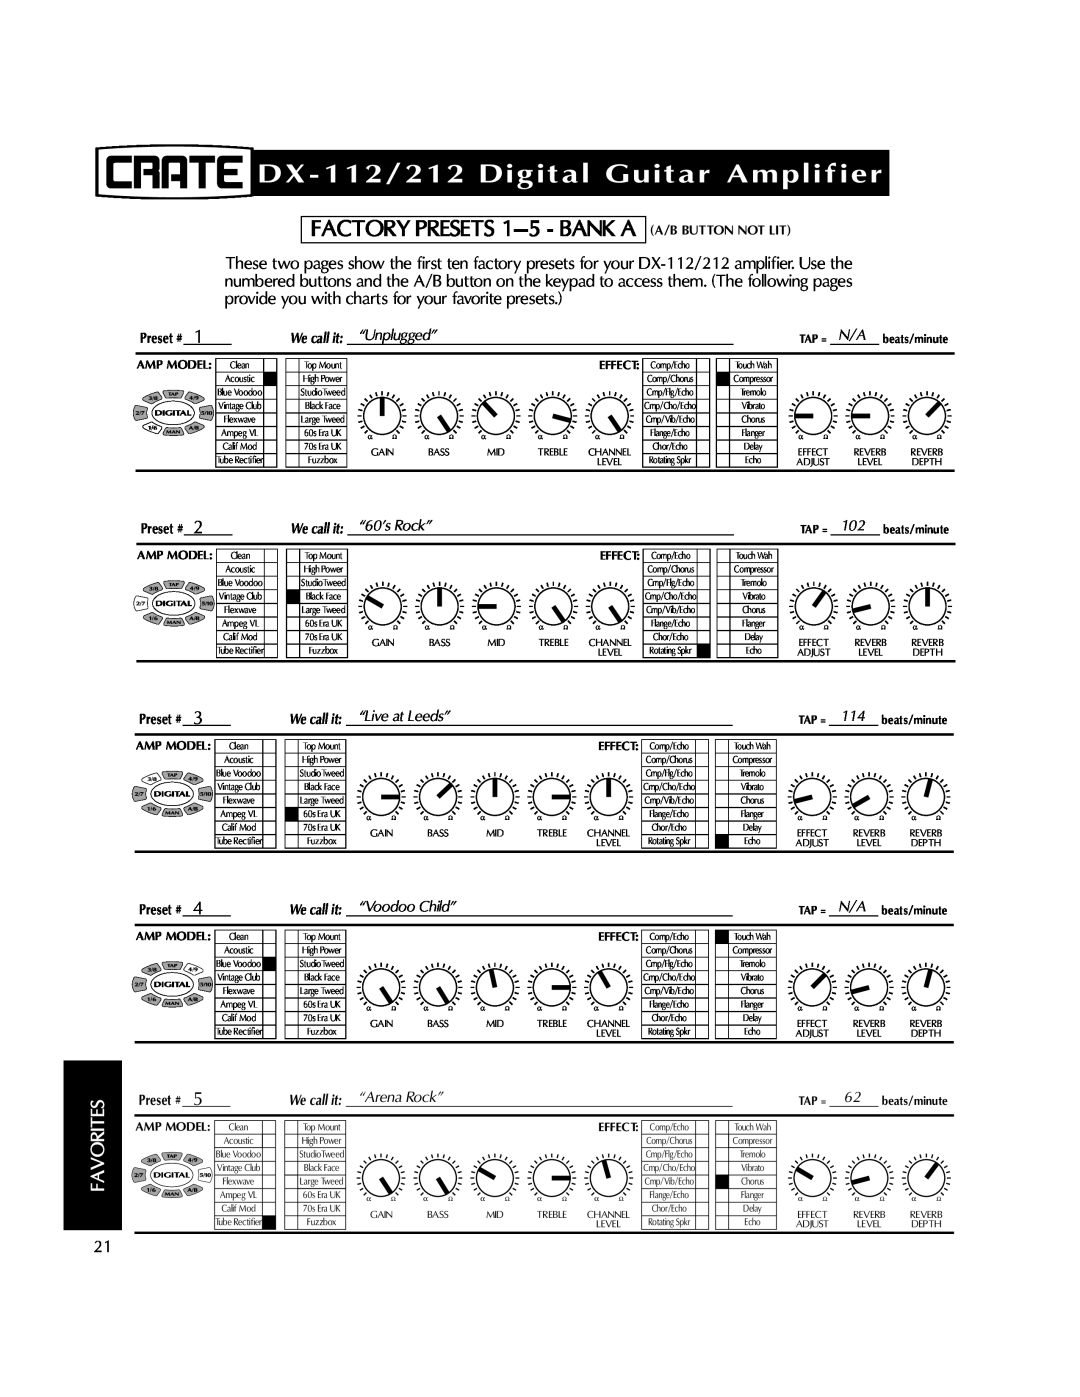 Crate Amplifiers FACTORY PRESETS 1-5- BANK A, Favorites, DX-112/212Digital Guitar Amplifier, We call it “Unplugged” 